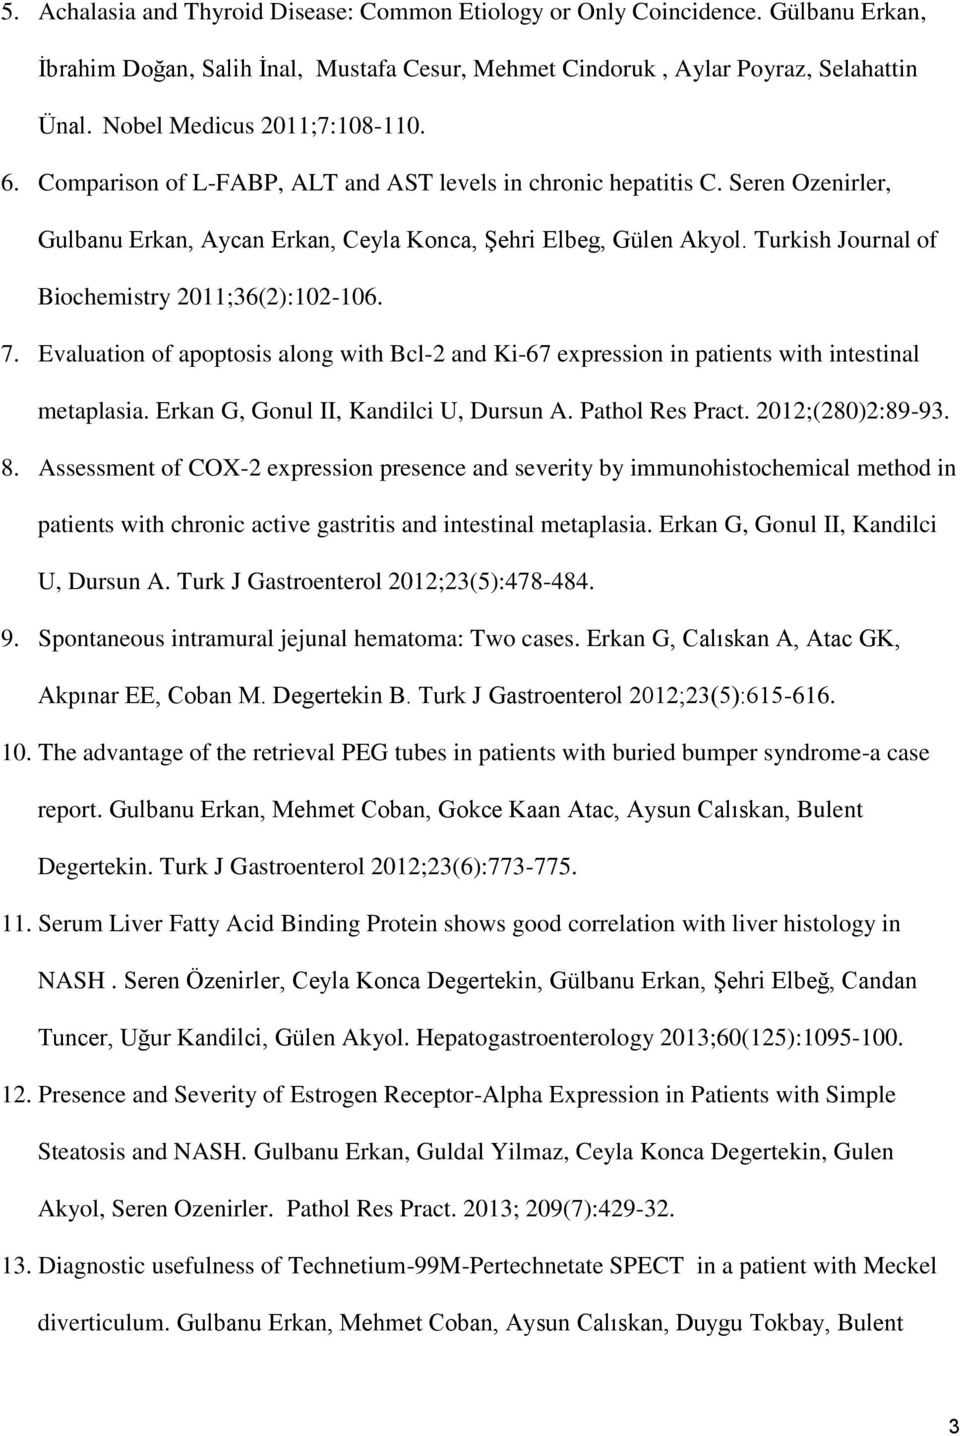 Turkish Journal of Biochemistry 2011;36(2):102-106. 7. Evaluation of apoptosis along with Bcl-2 and Ki-67 expression in patients with intestinal metaplasia. Erkan G, Gonul II, Kandilci U, Dursun A.